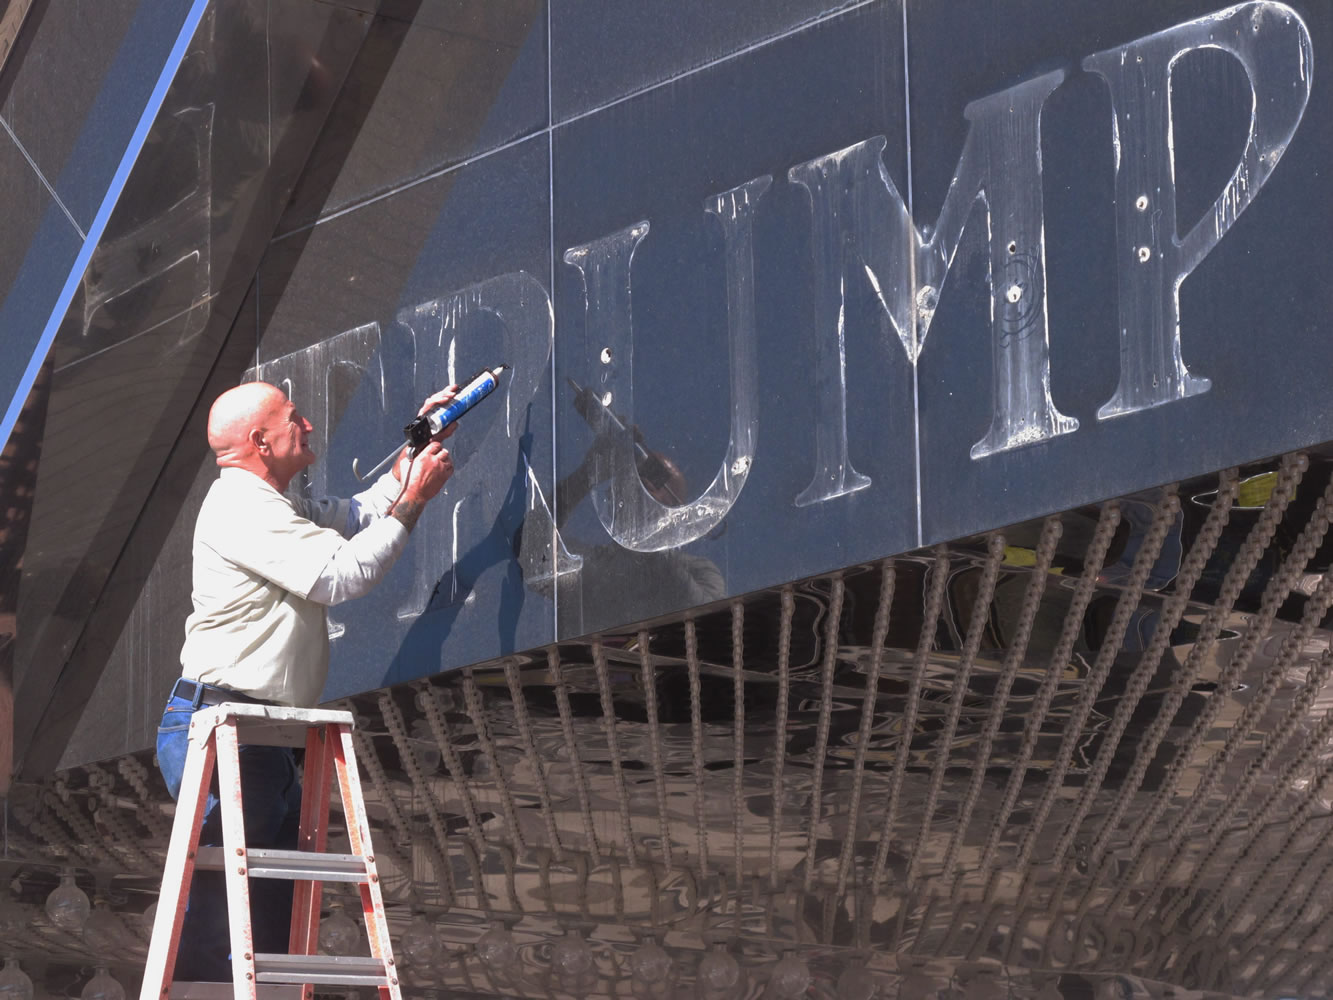 A worker applies caulk to holes in the facade of the former Trump Plaza casino Oct. 6 in Atlantic City, N.J., after letters spelling out the casino's name were removed. The casino closed on Sept. 16, one of four to go out of business in Atlantic City in 2014.